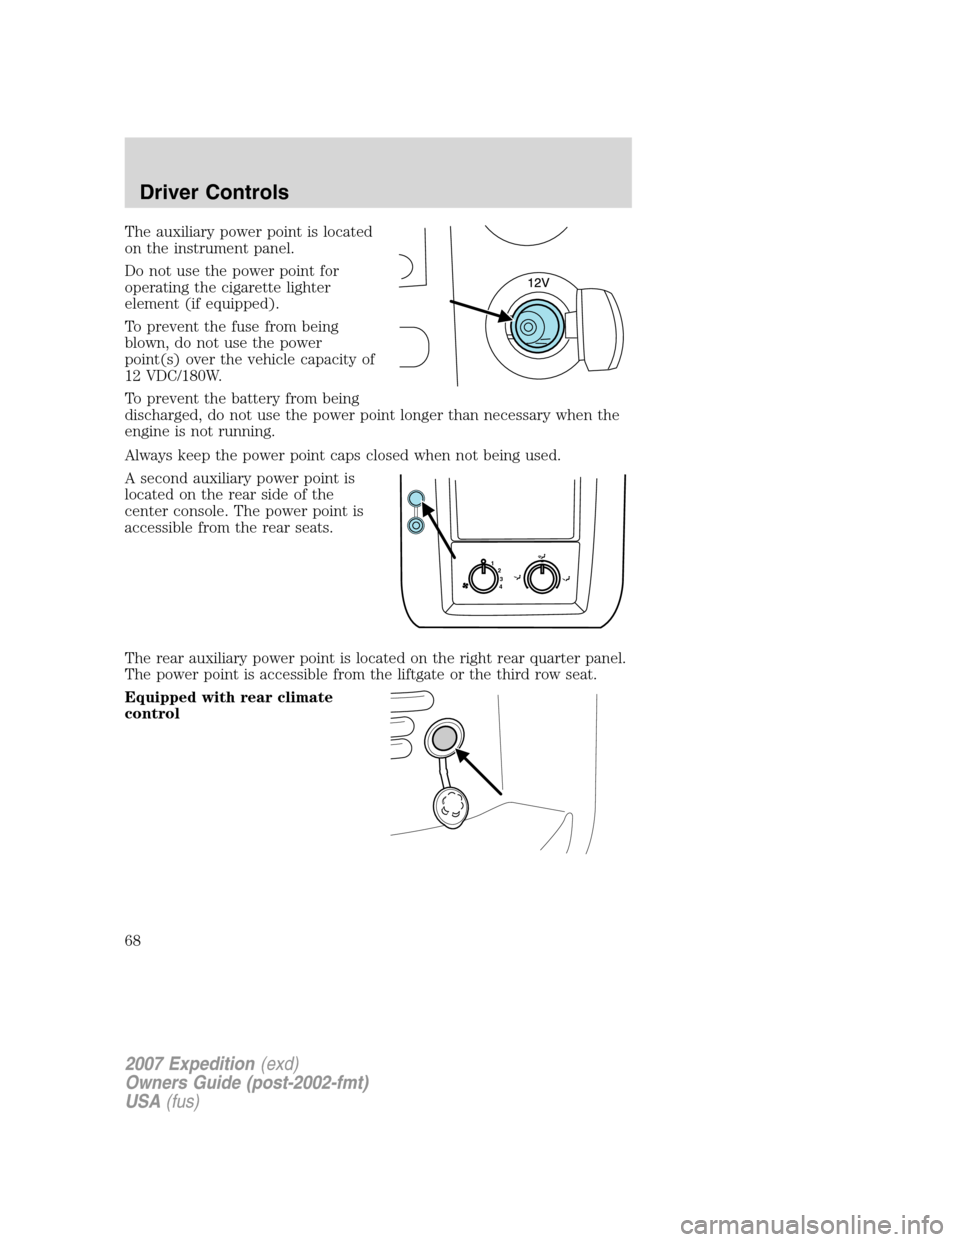 FORD EXPEDITION 2007 3.G Owners Manual The auxiliary power point is located
on the instrument panel.
Do not use the power point for
operating the cigarette lighter
element (if equipped).
To prevent the fuse from being
blown, do not use the